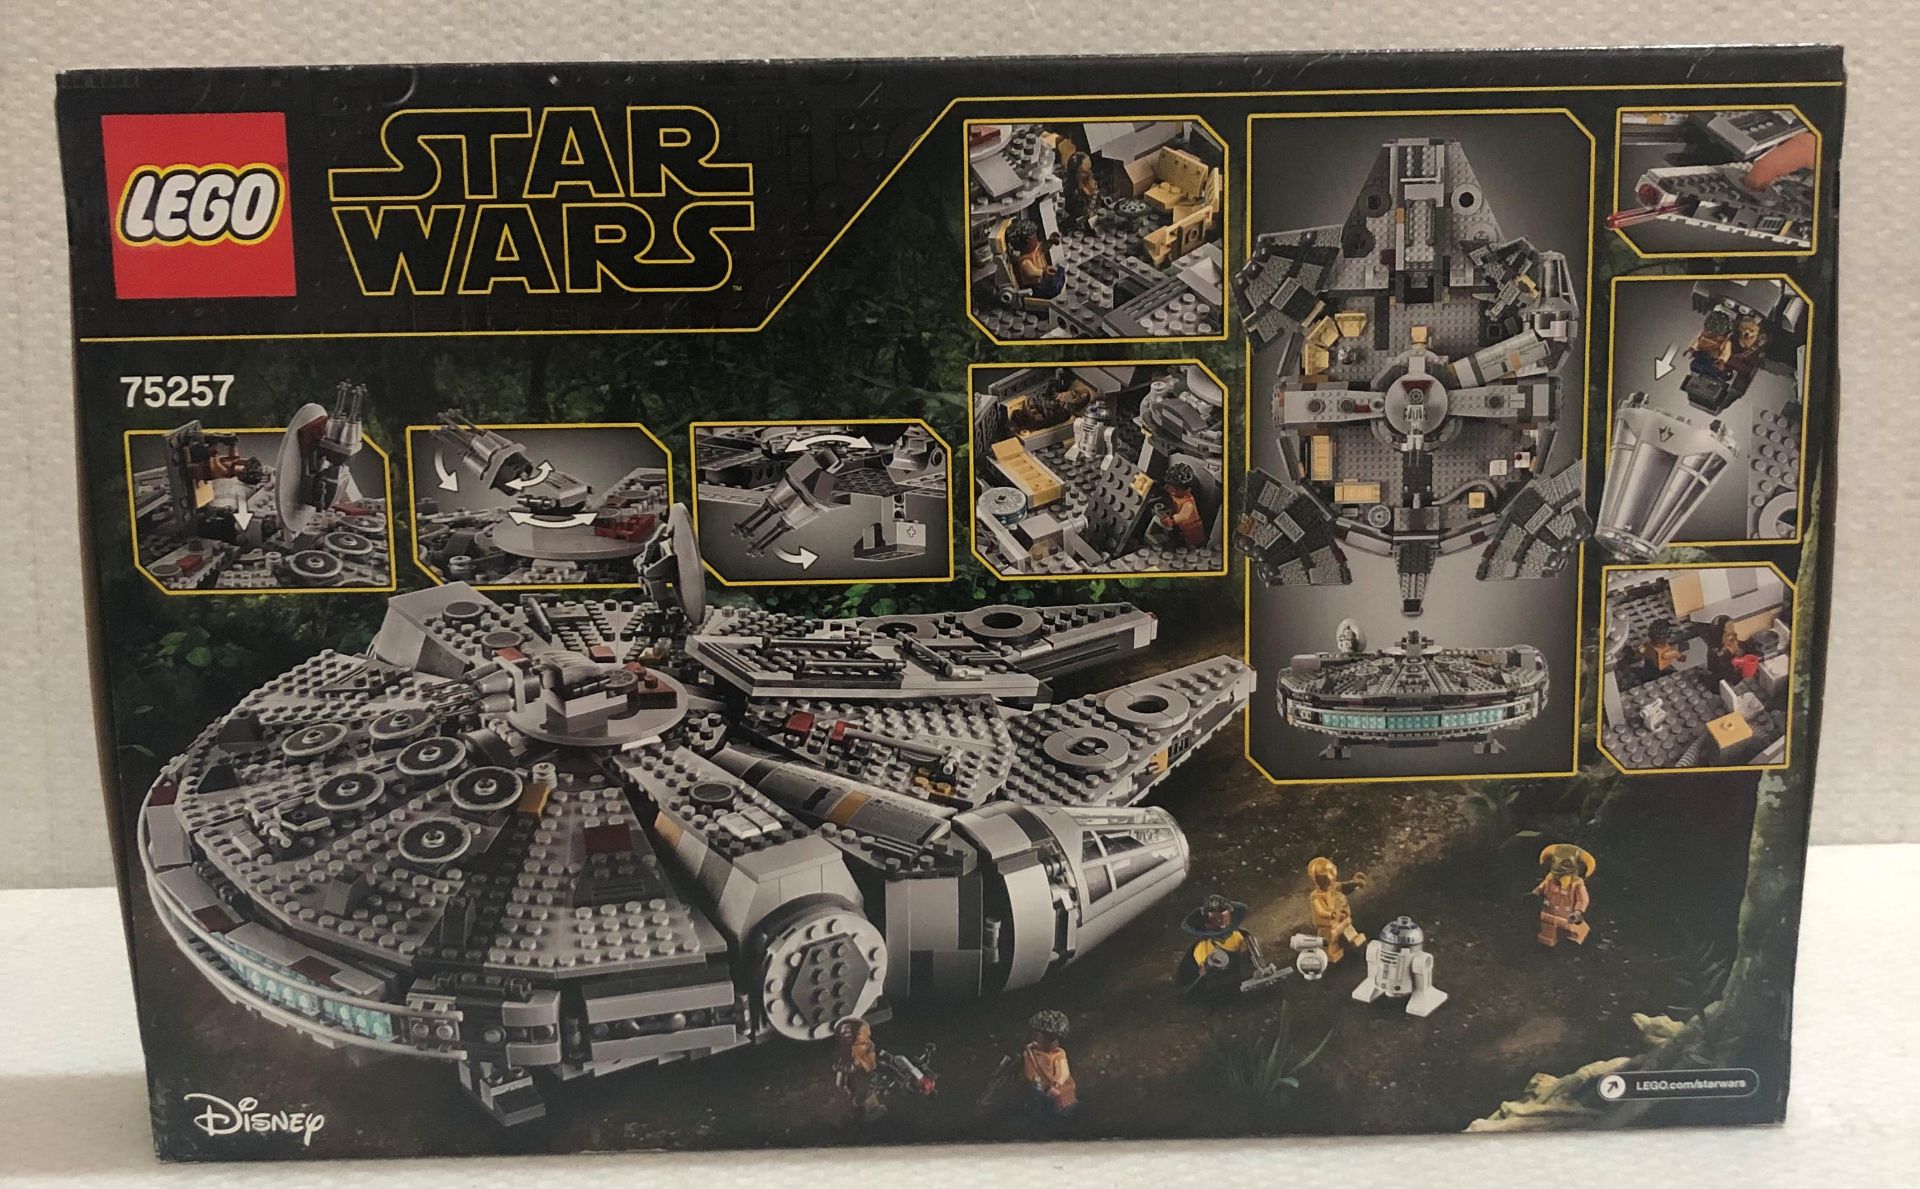 1 x Lego Star Wars Millenium Falcon - Model 75257 - New/Boxed - Image 4 of 4